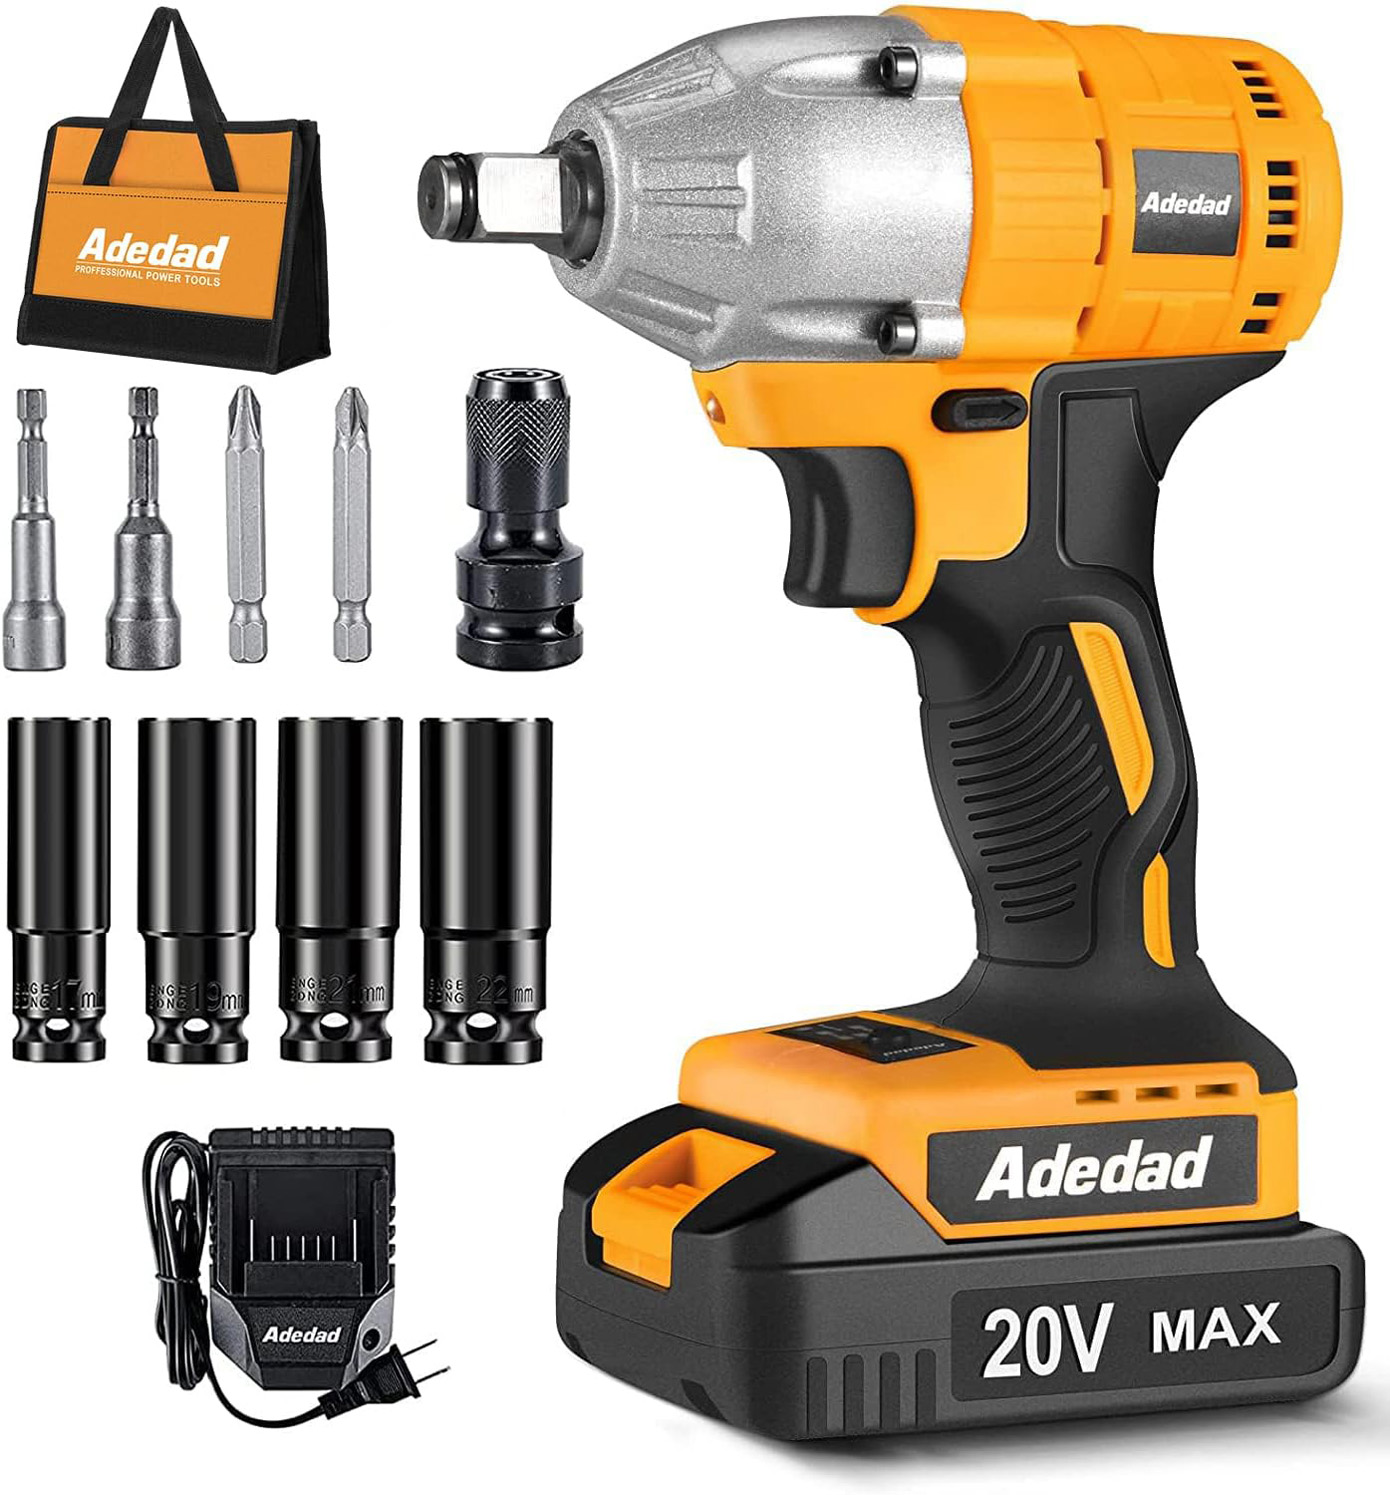 Adedad Cordless Impact Wrench 1/2 inch, 20V Brushless Impact Gun with Battery and Charger